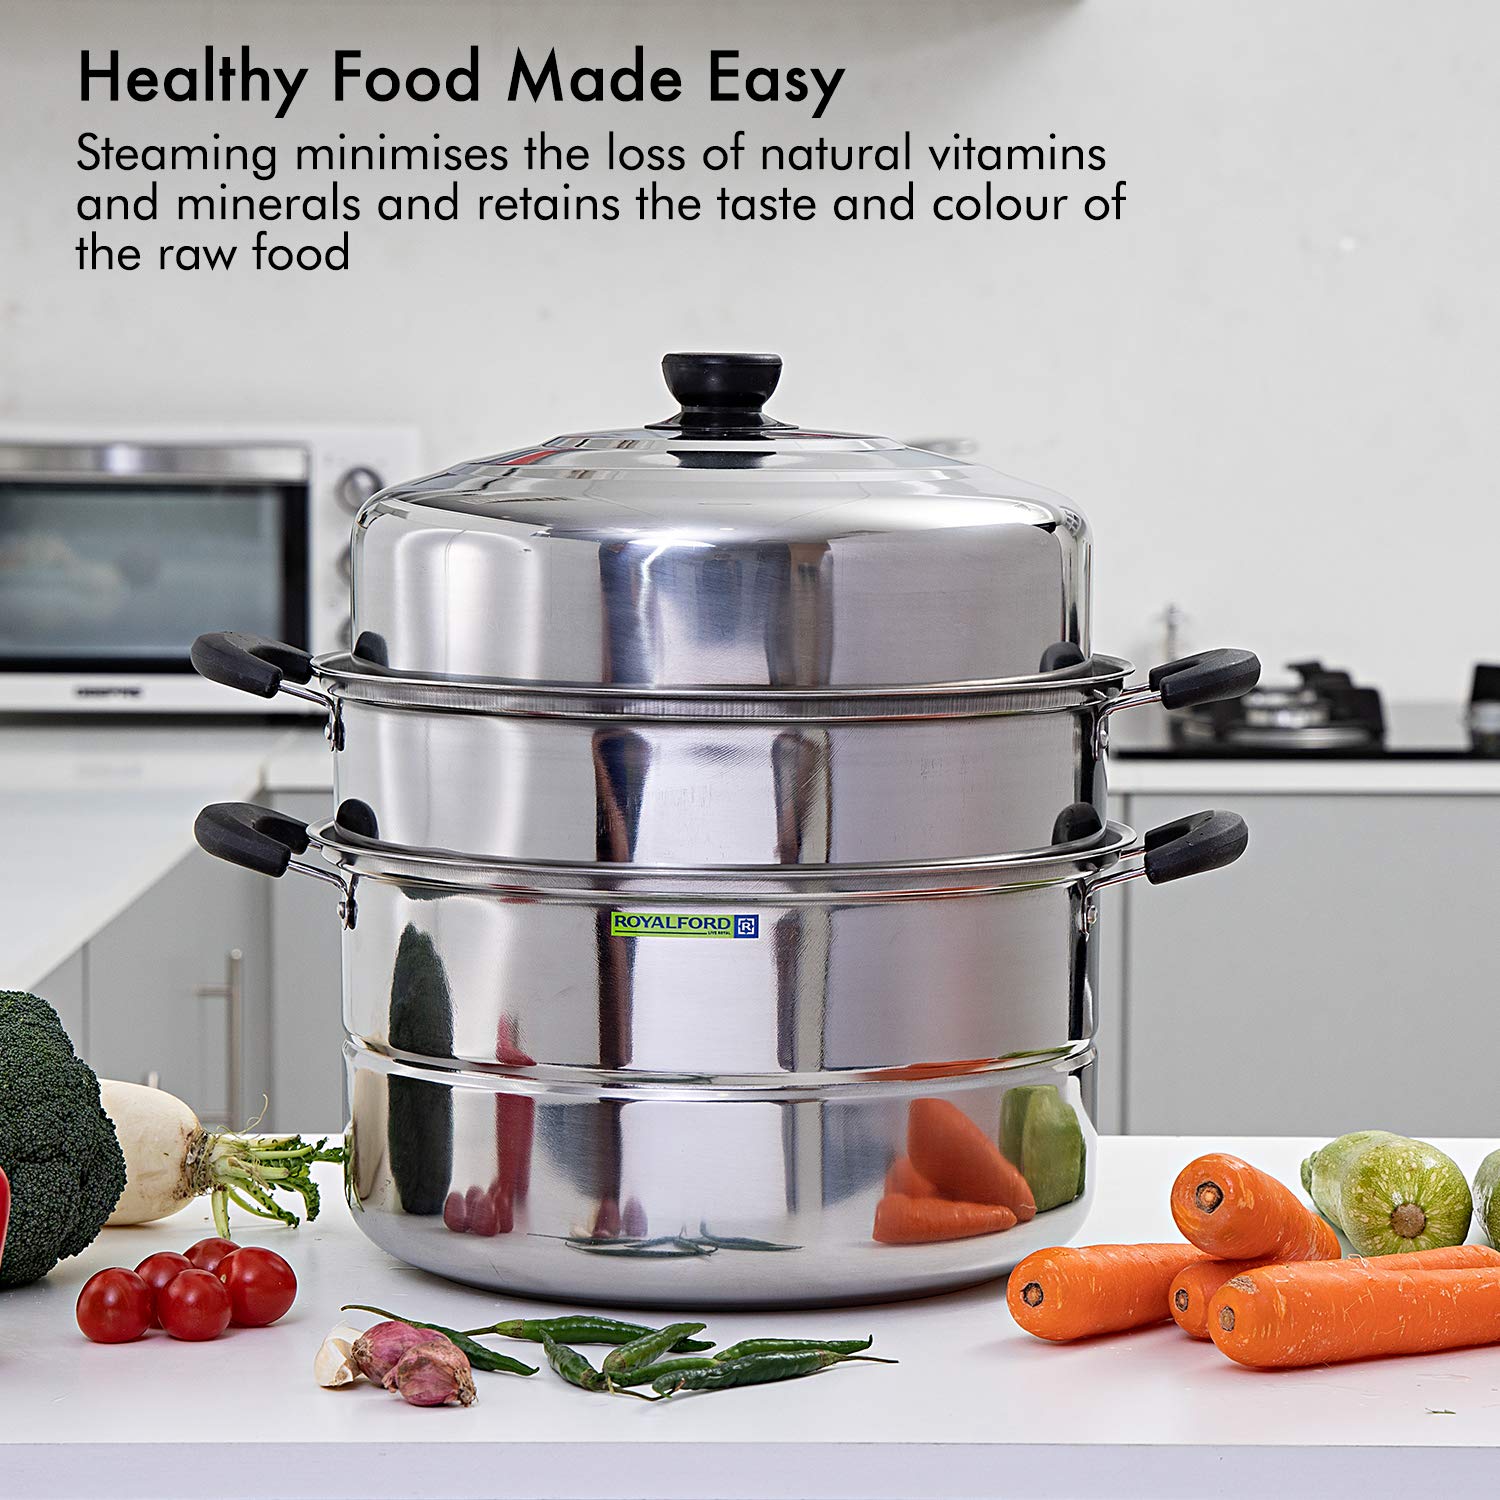 Royalford Induction-Safe Stainless Steel Large 3-Tier Food Steamer Pot with Lid| Double Layer Multi Food Cook Stock Pot - Cool Touch Handles - Stylish Design, Easy Food Release & Clean-Up - 9L